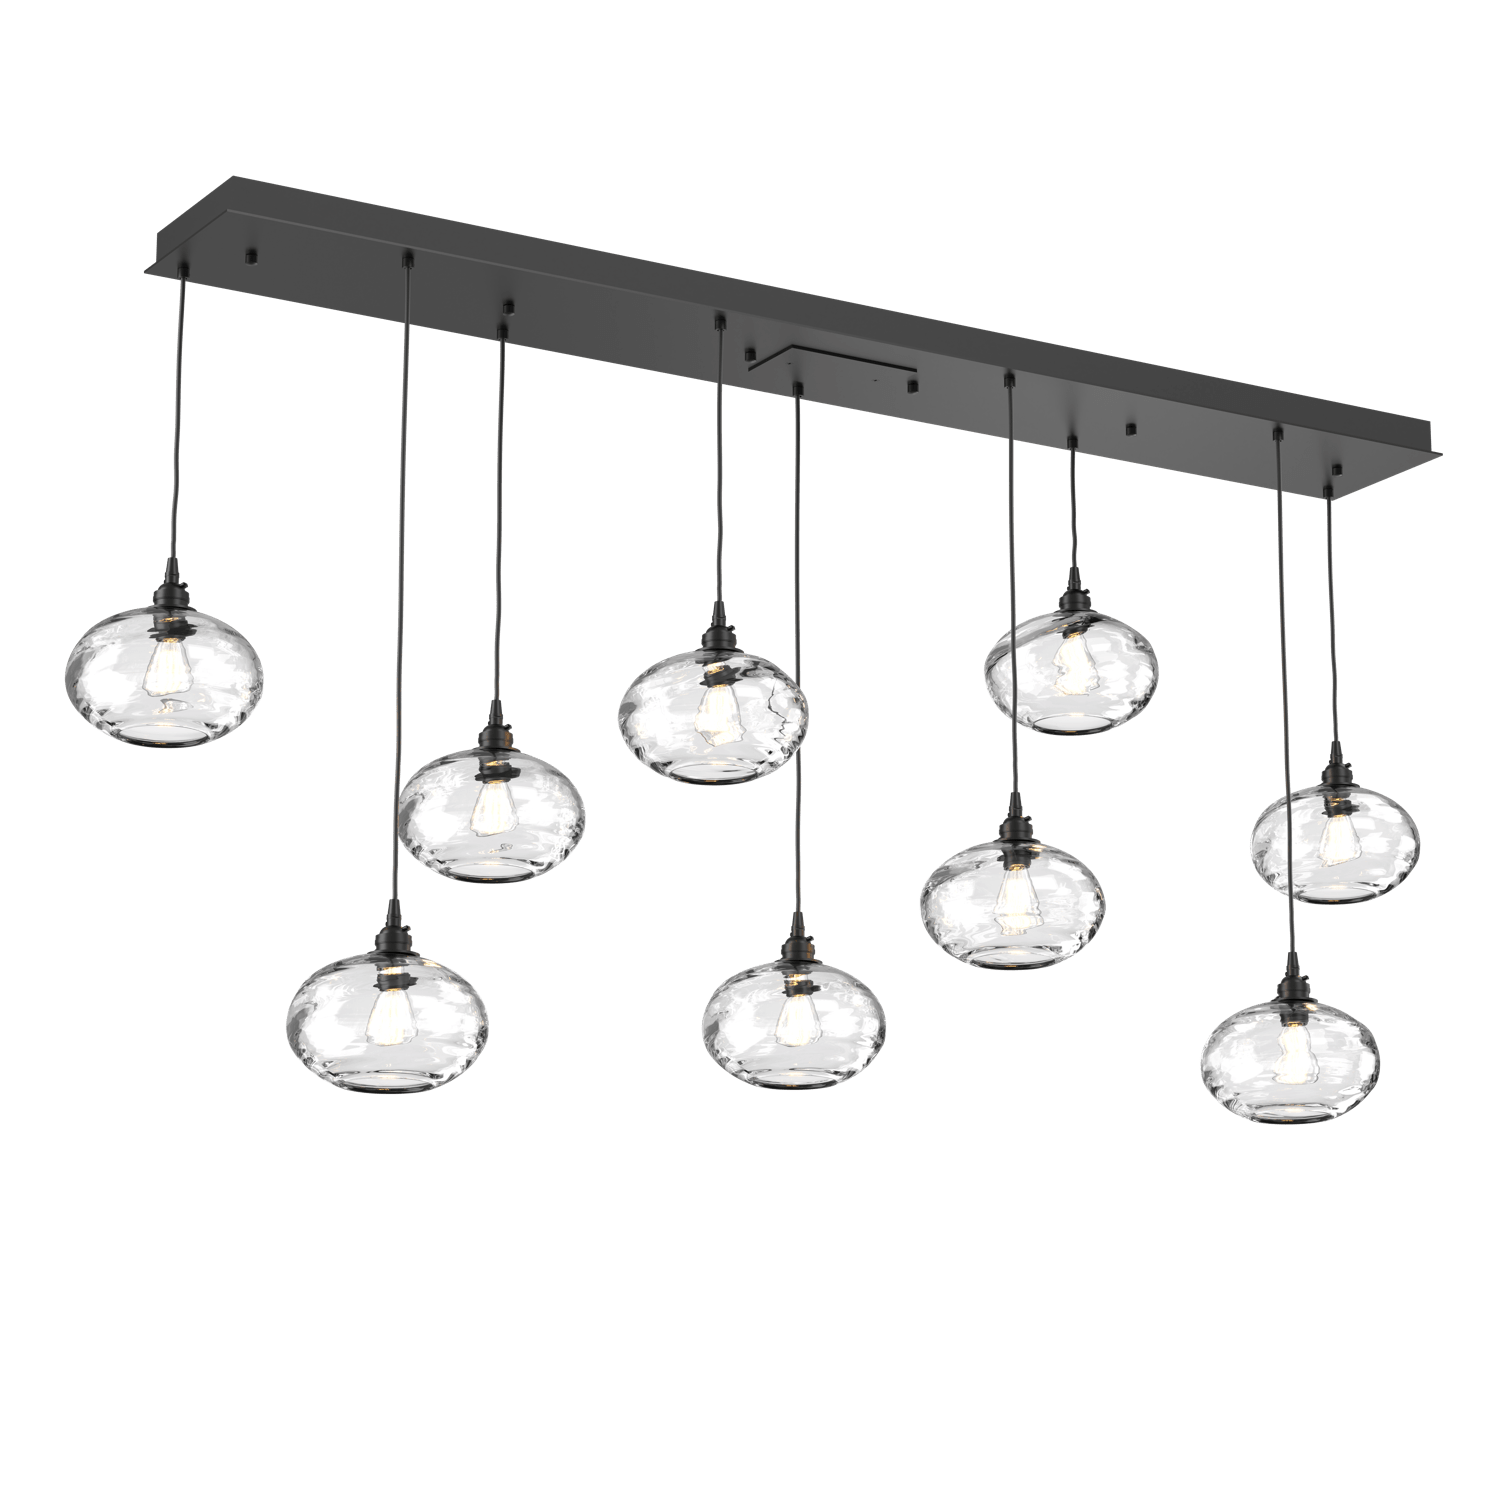 PLB0036-09-MB-OC-Hammerton-Studio-Optic-Blown-Glass-Coppa-9-light-linear-pendant-chandelier-with-matte-black-finish-and-optic-clear-blown-glass-shades-and-incandescent-lamping